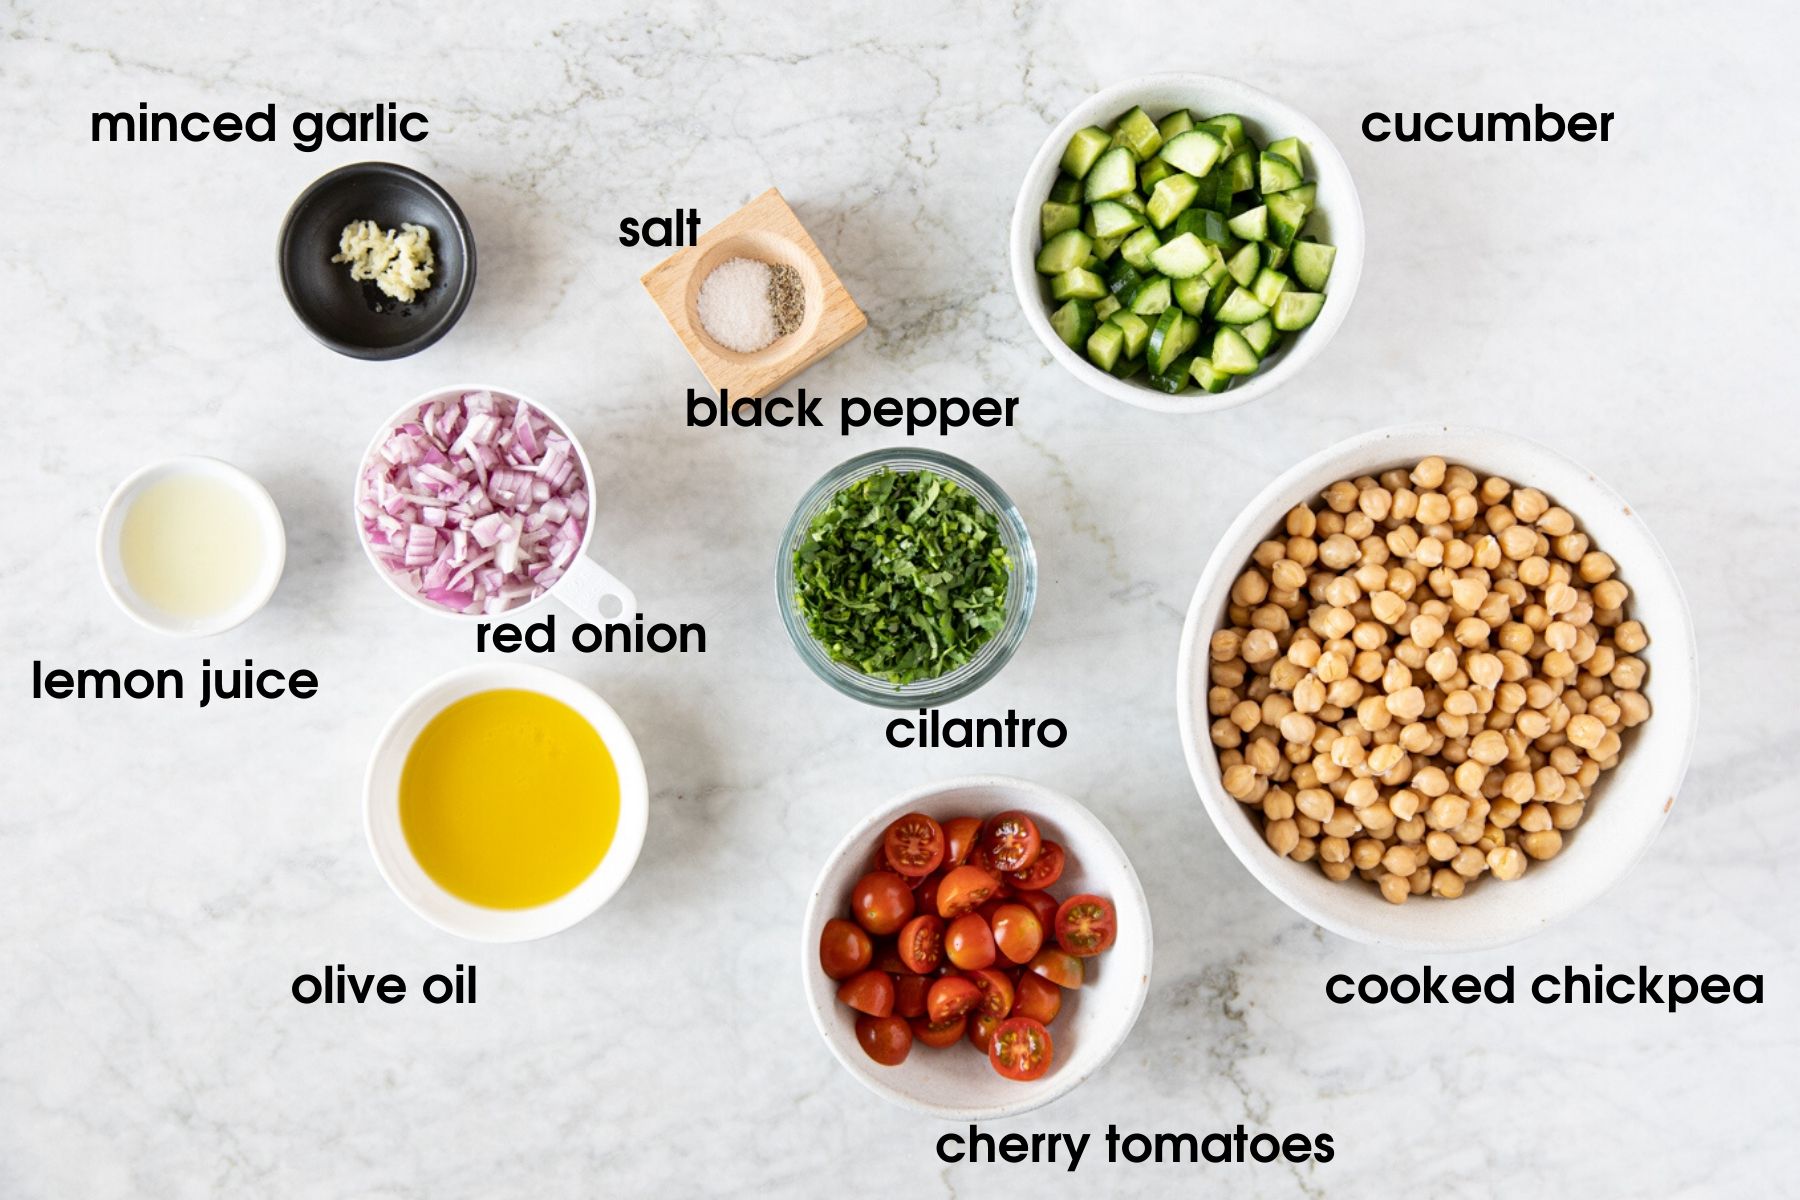 All ingredients for Easy Chickpea Salad With Tomatoes and Cucumbers: minced garlic, salt, black pepper, cucumber, lemon juice, red onion, cilantro, chickpea, olive oil, and cherry tomatoes